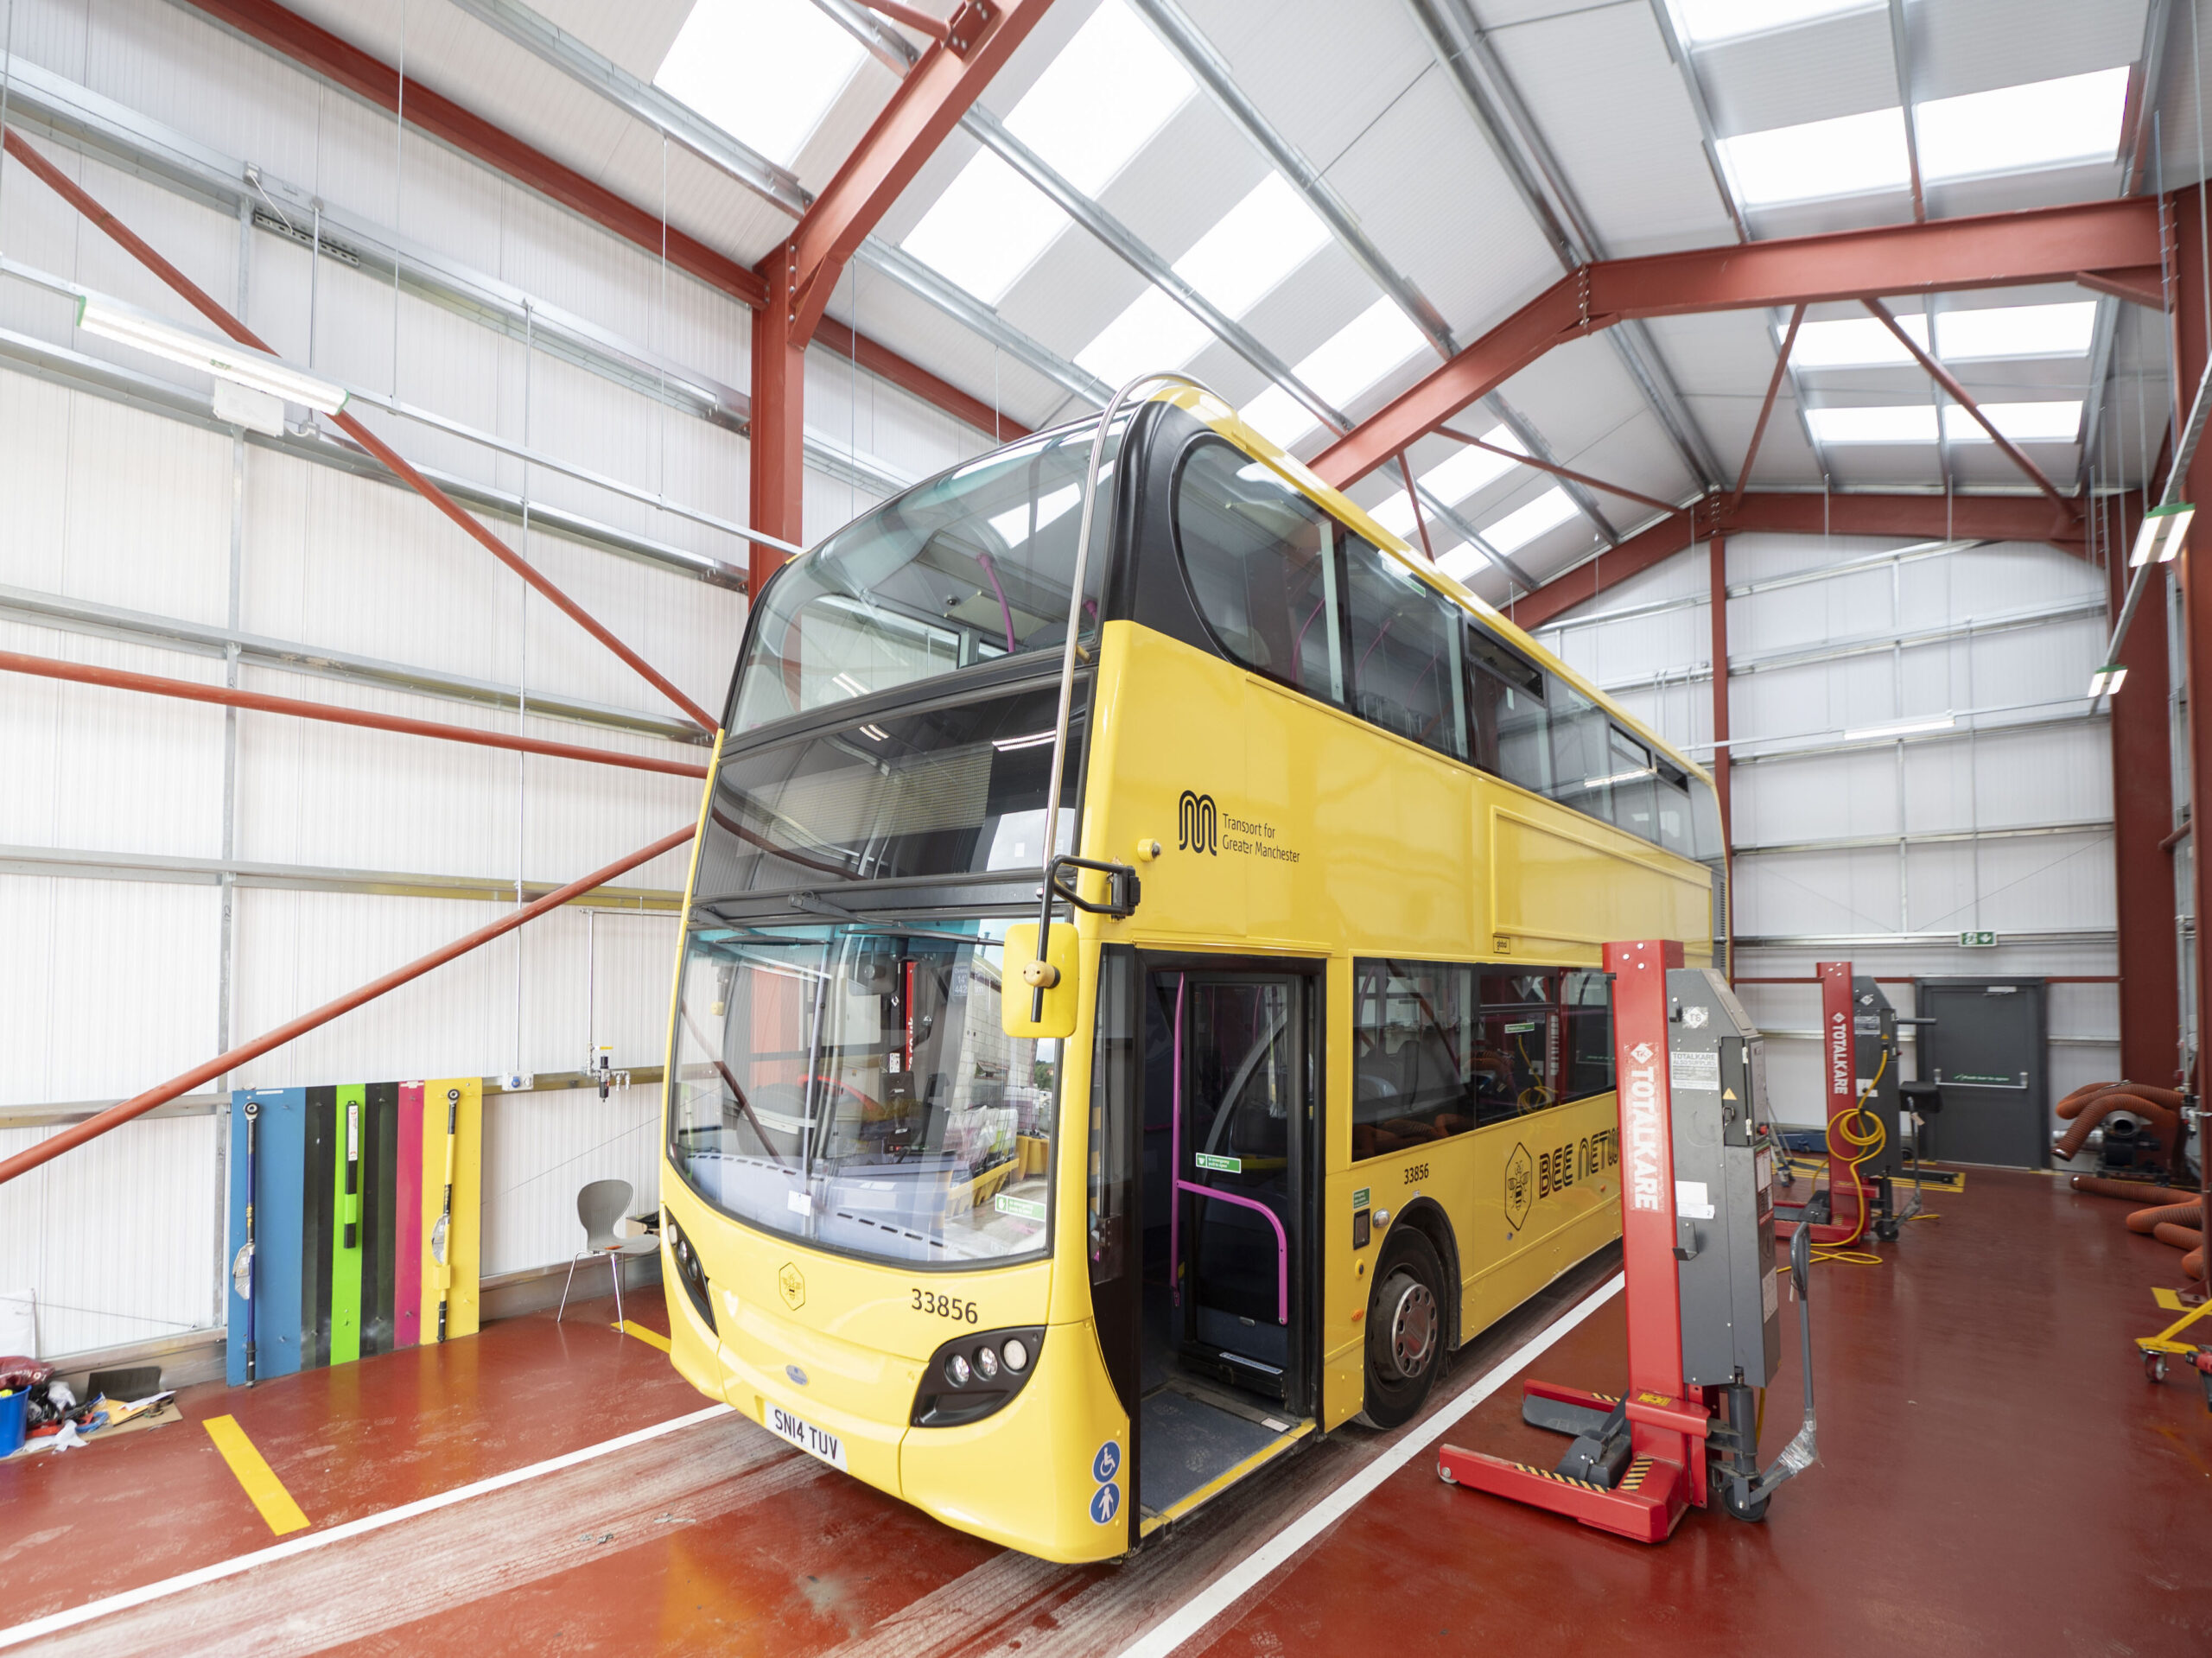 UK: First Bus Completes Upgrade at Rochdale Bus Depot